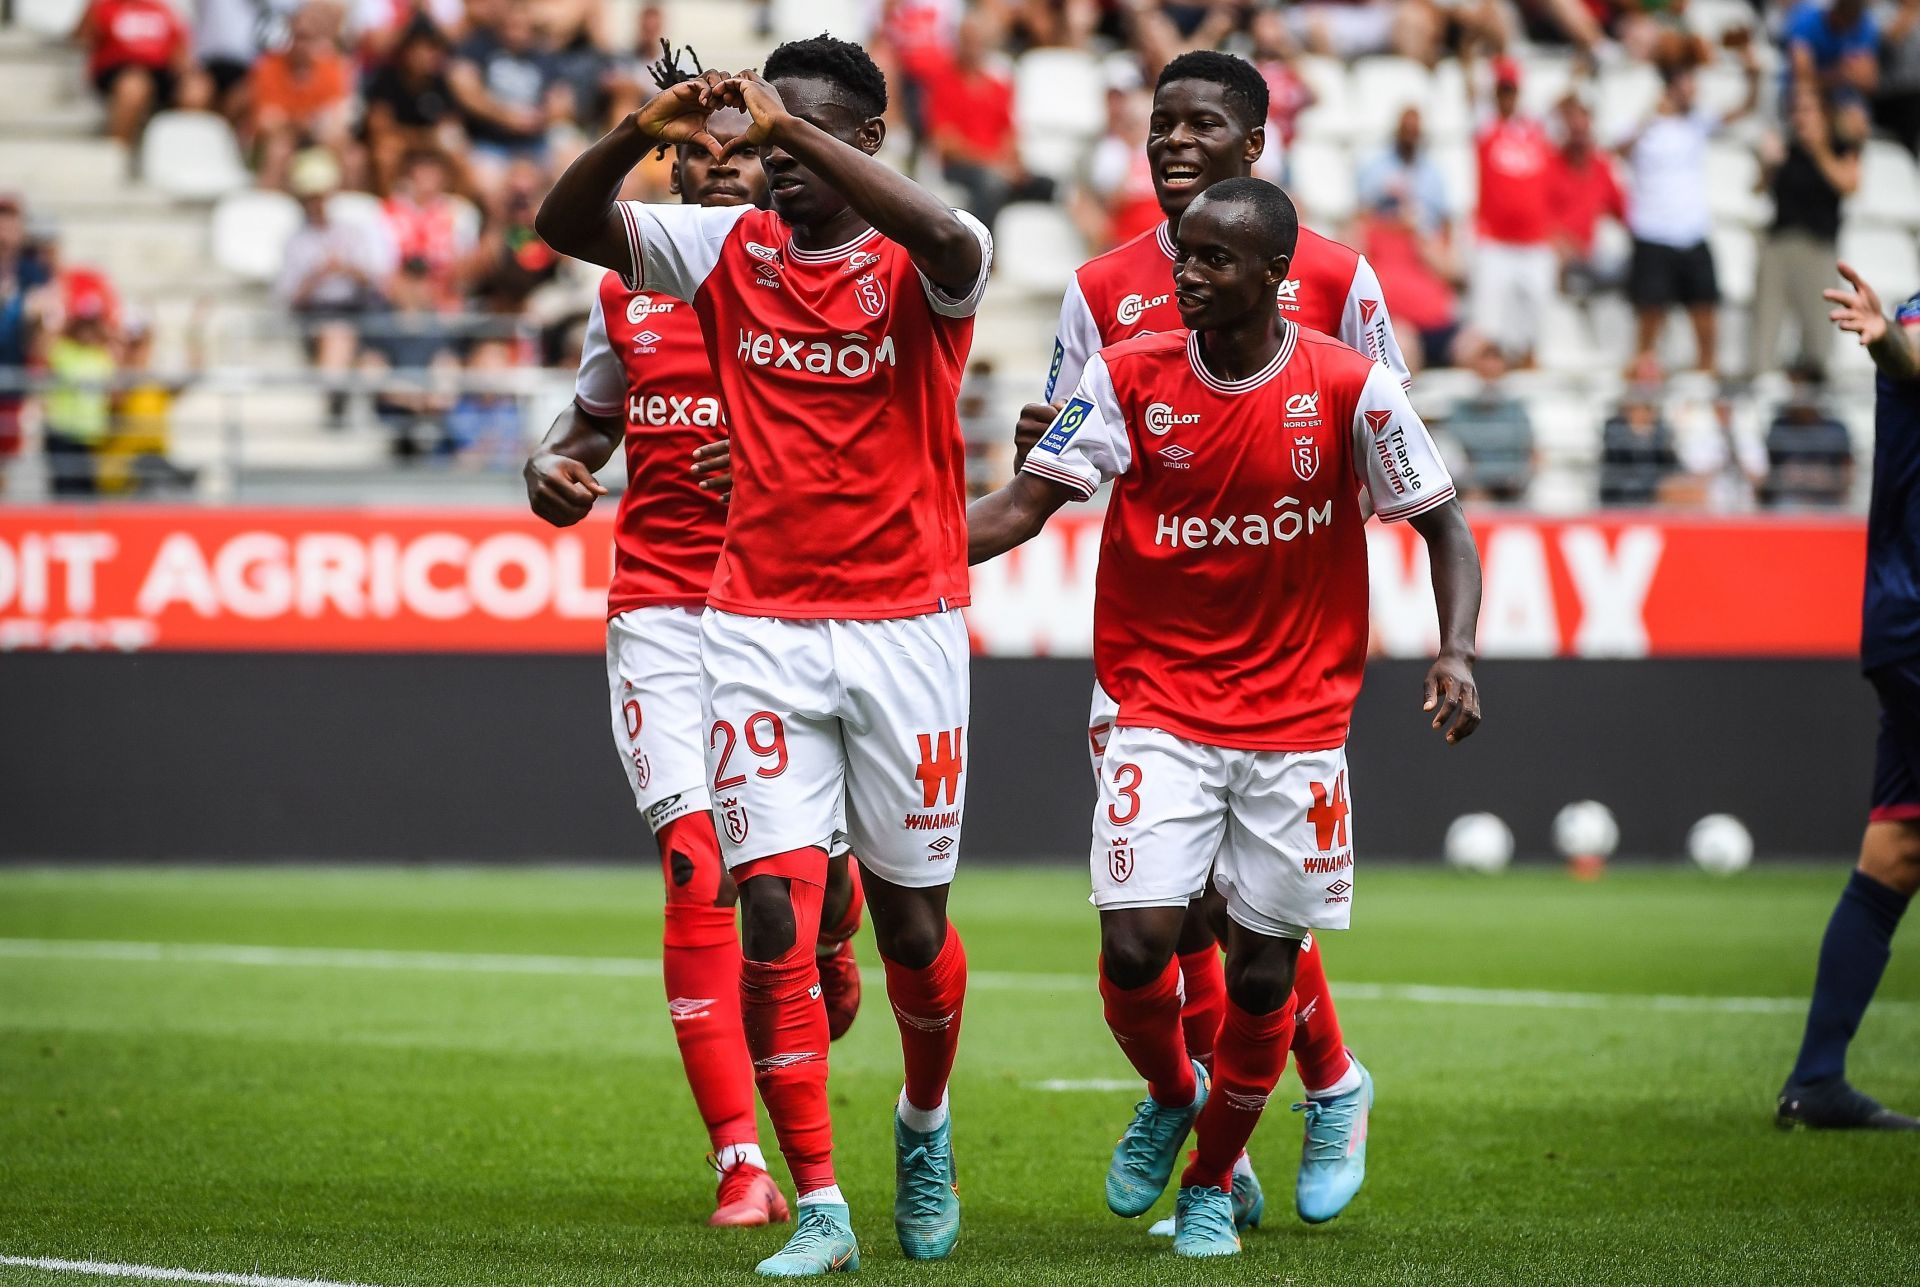 Can Folarin Balogun find the net for Reims again this weekend when they face Toulouse?